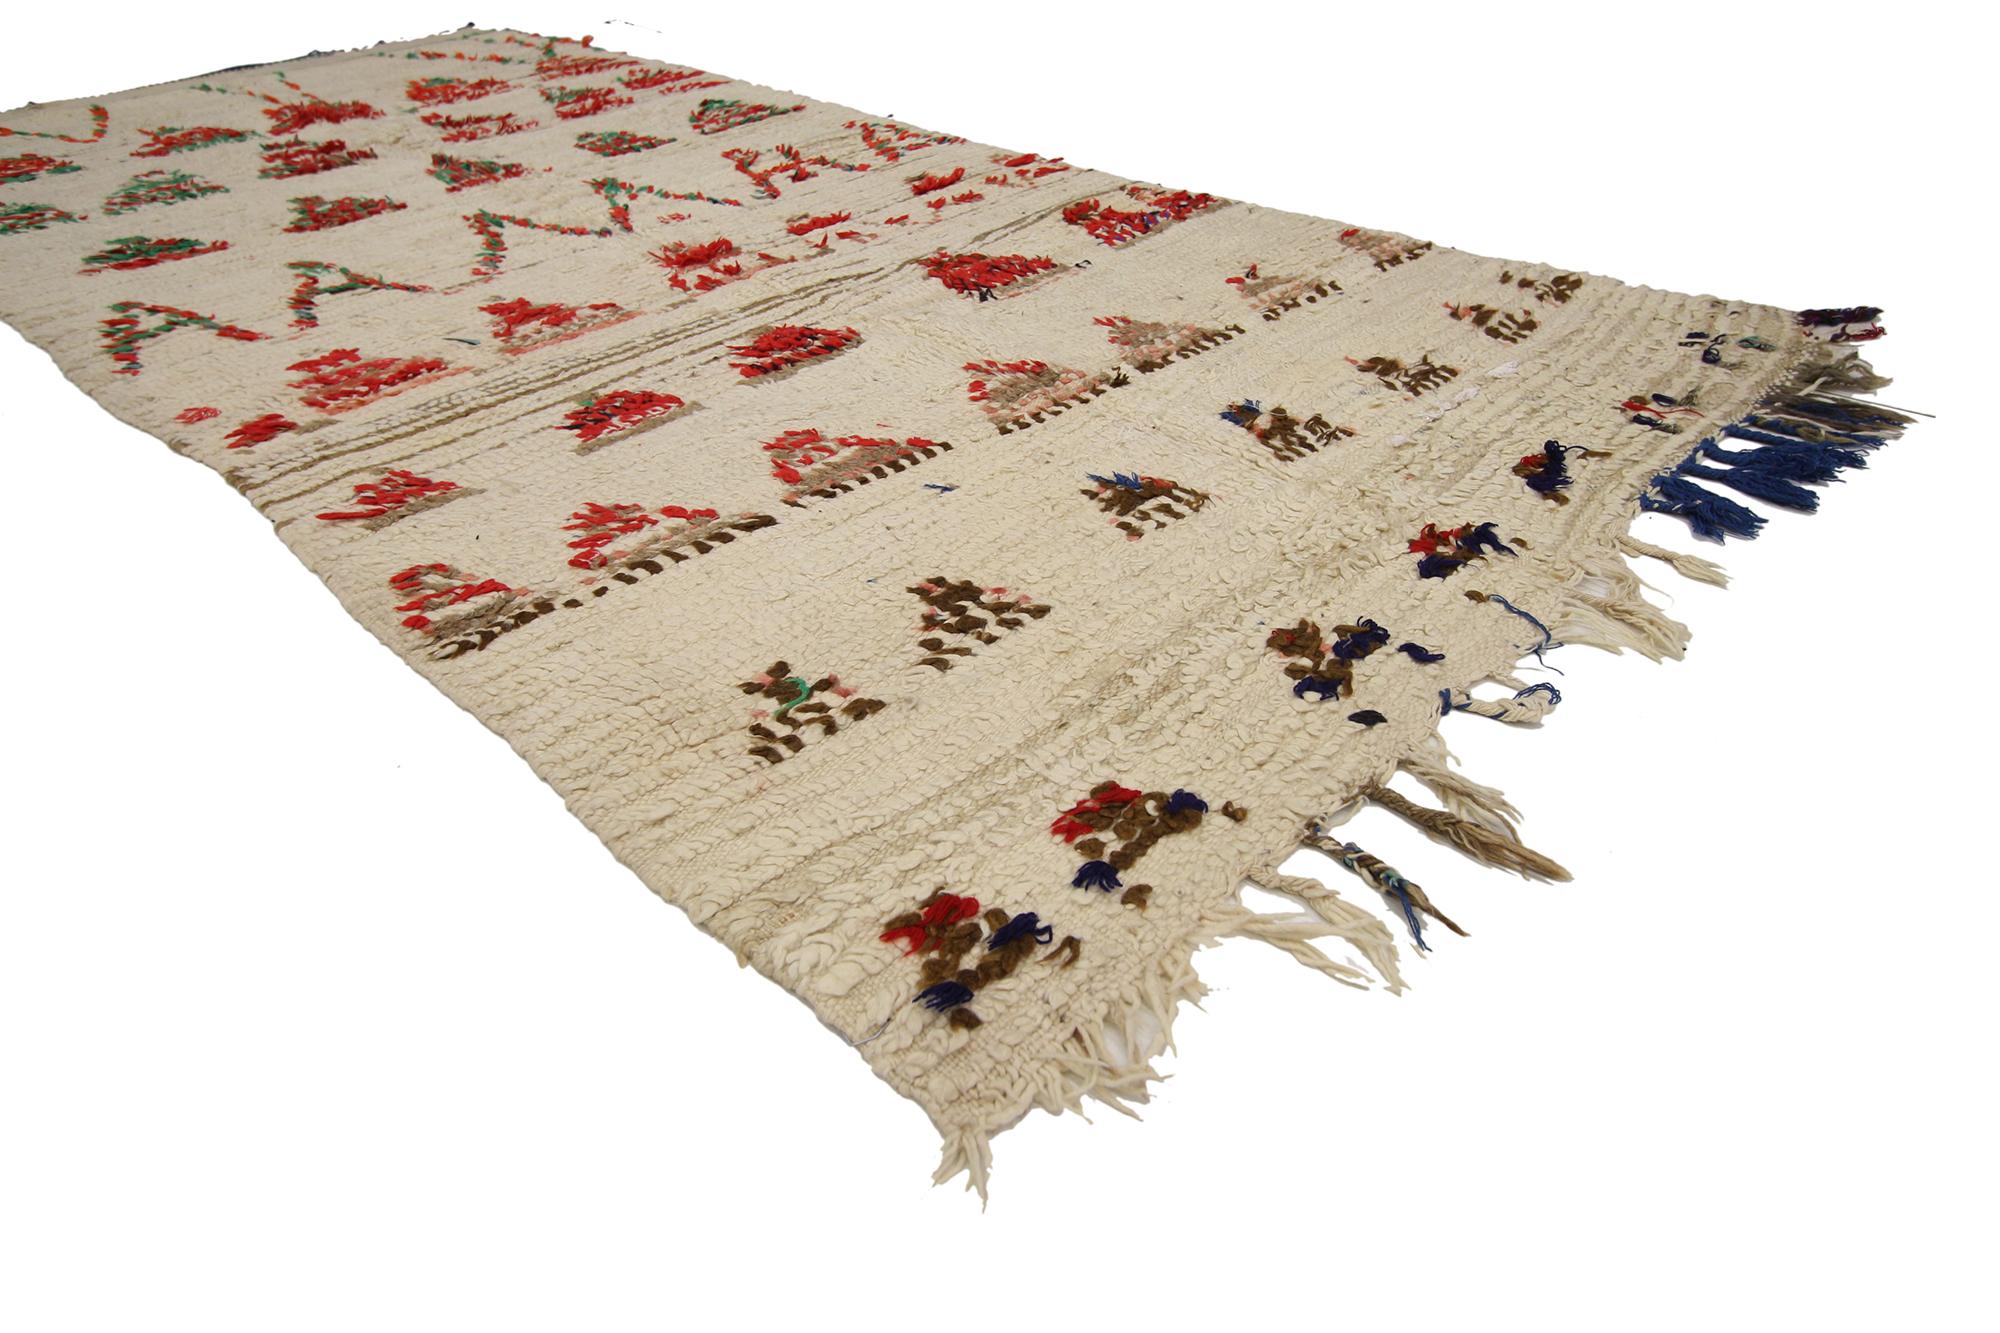 74818, tribal style vintage Moroccan Azilal runner Moroccan hallway runner. With its whimsical triangular patterns, this Moroccan Azilal runner is based on free and abstract compositions. It’s multiple triangles and color pop on the creamy-beige